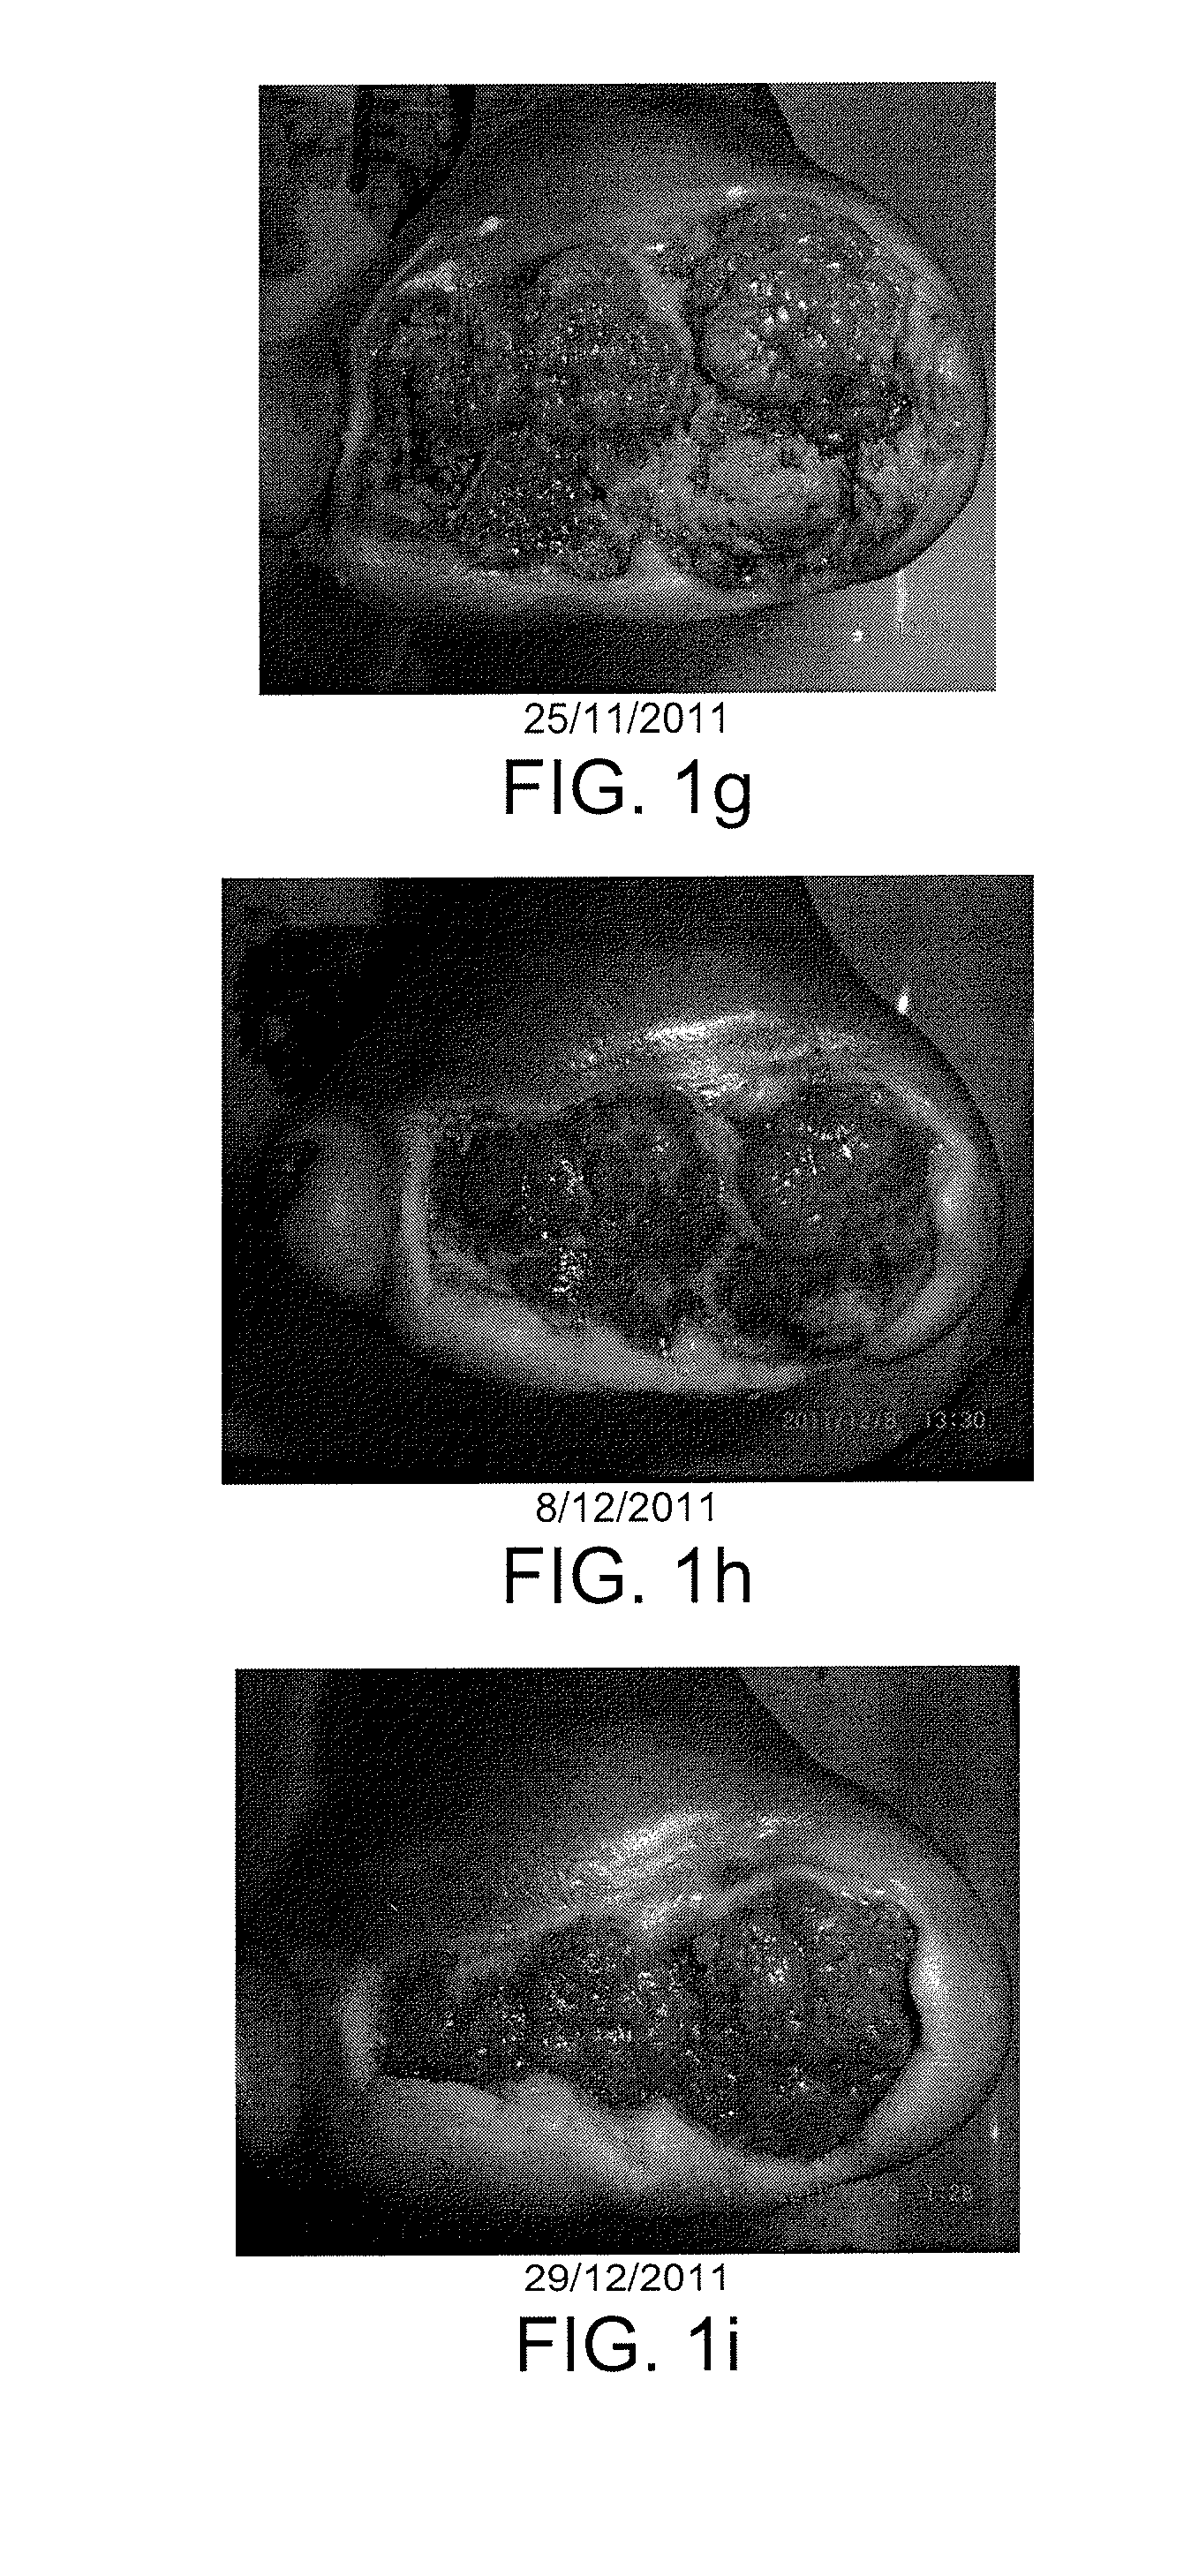 Compositions for the debridement, granulation and reepithelialization of wounds in man